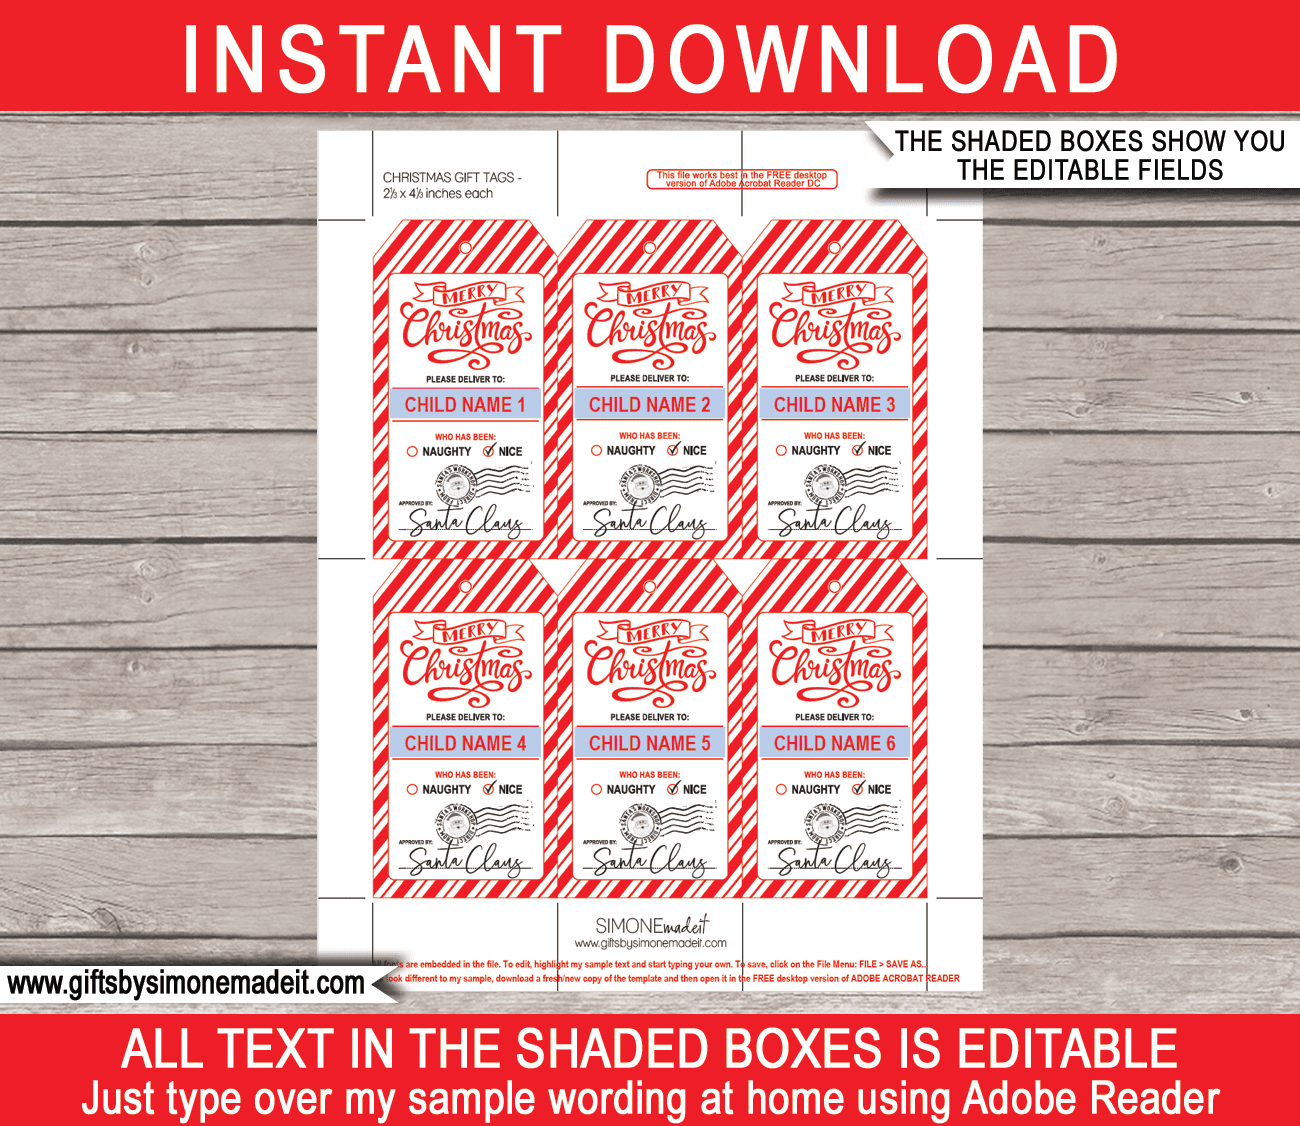 10 Free Printable Gift Tag Templates and Designs